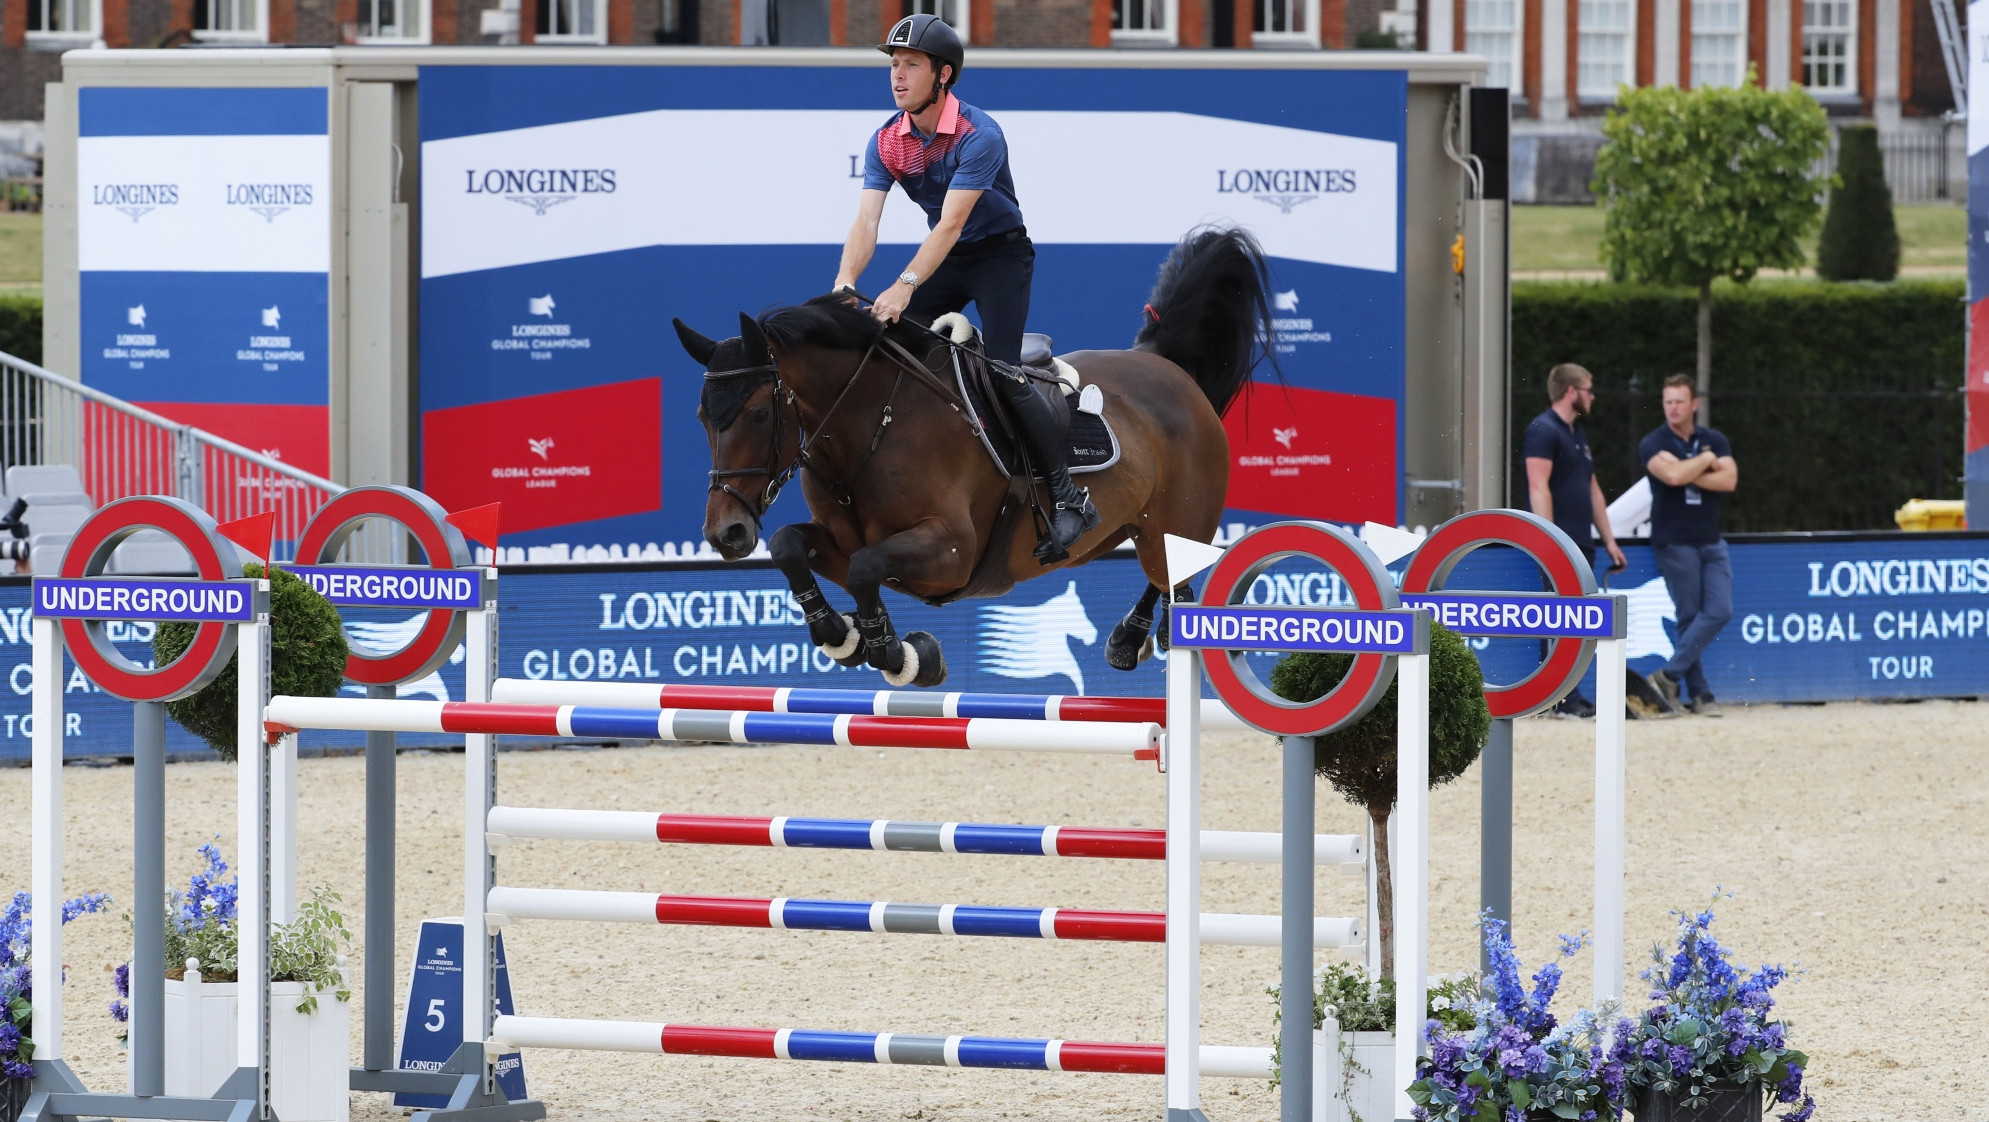 Competition will take place at Royal Hospital Chelsea – home of the Chelsea Flower Show ©LGCT